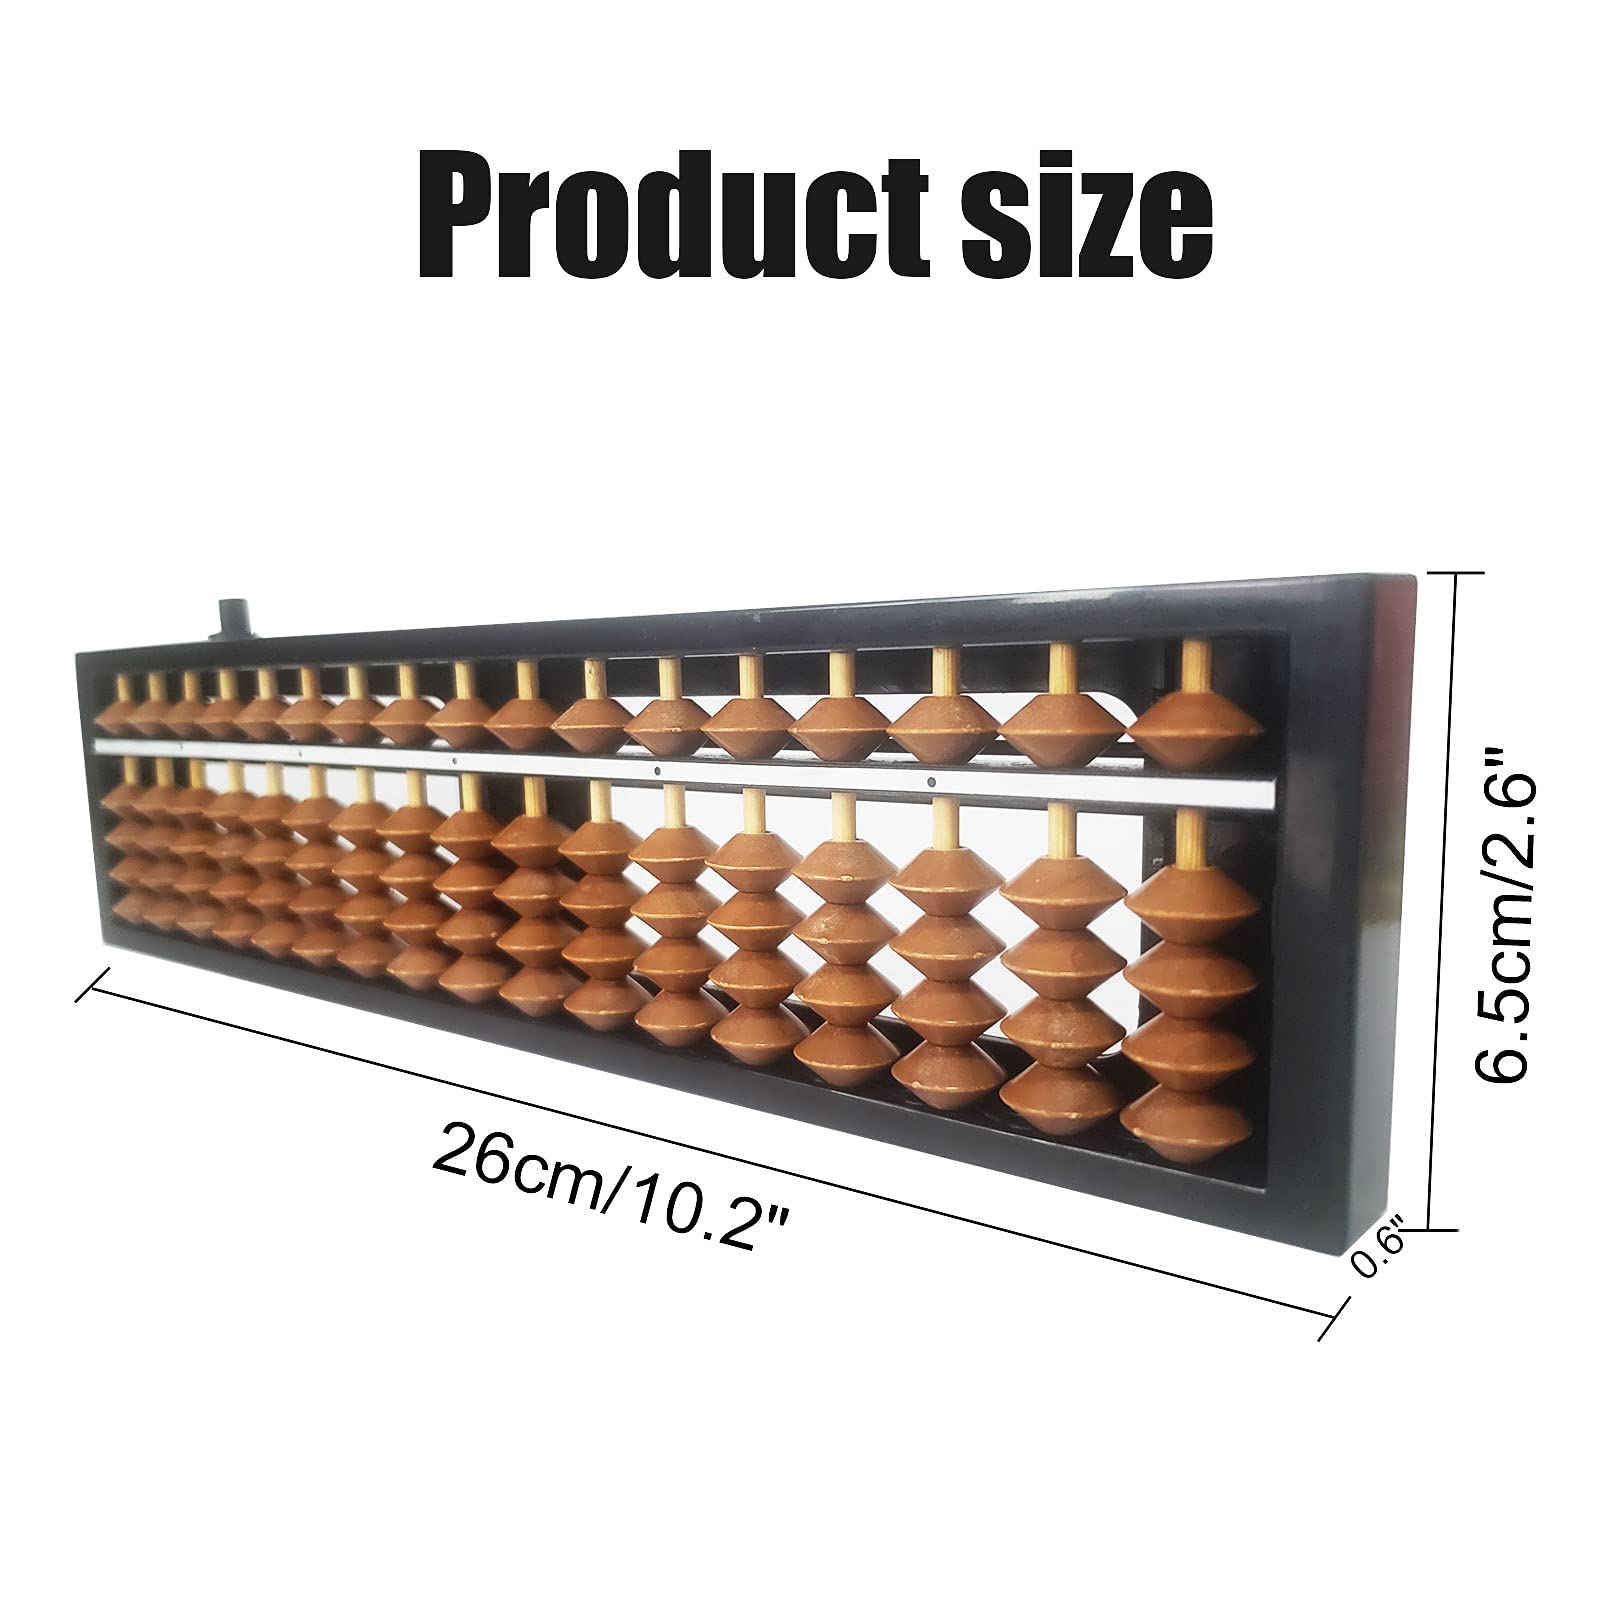 Vaupan Digit Standard Abacus Soroban Professional 17 Column (10.2 inch) Math Abacus, Math Calculating Tool with Reset Button for Adults Kids(Brown)